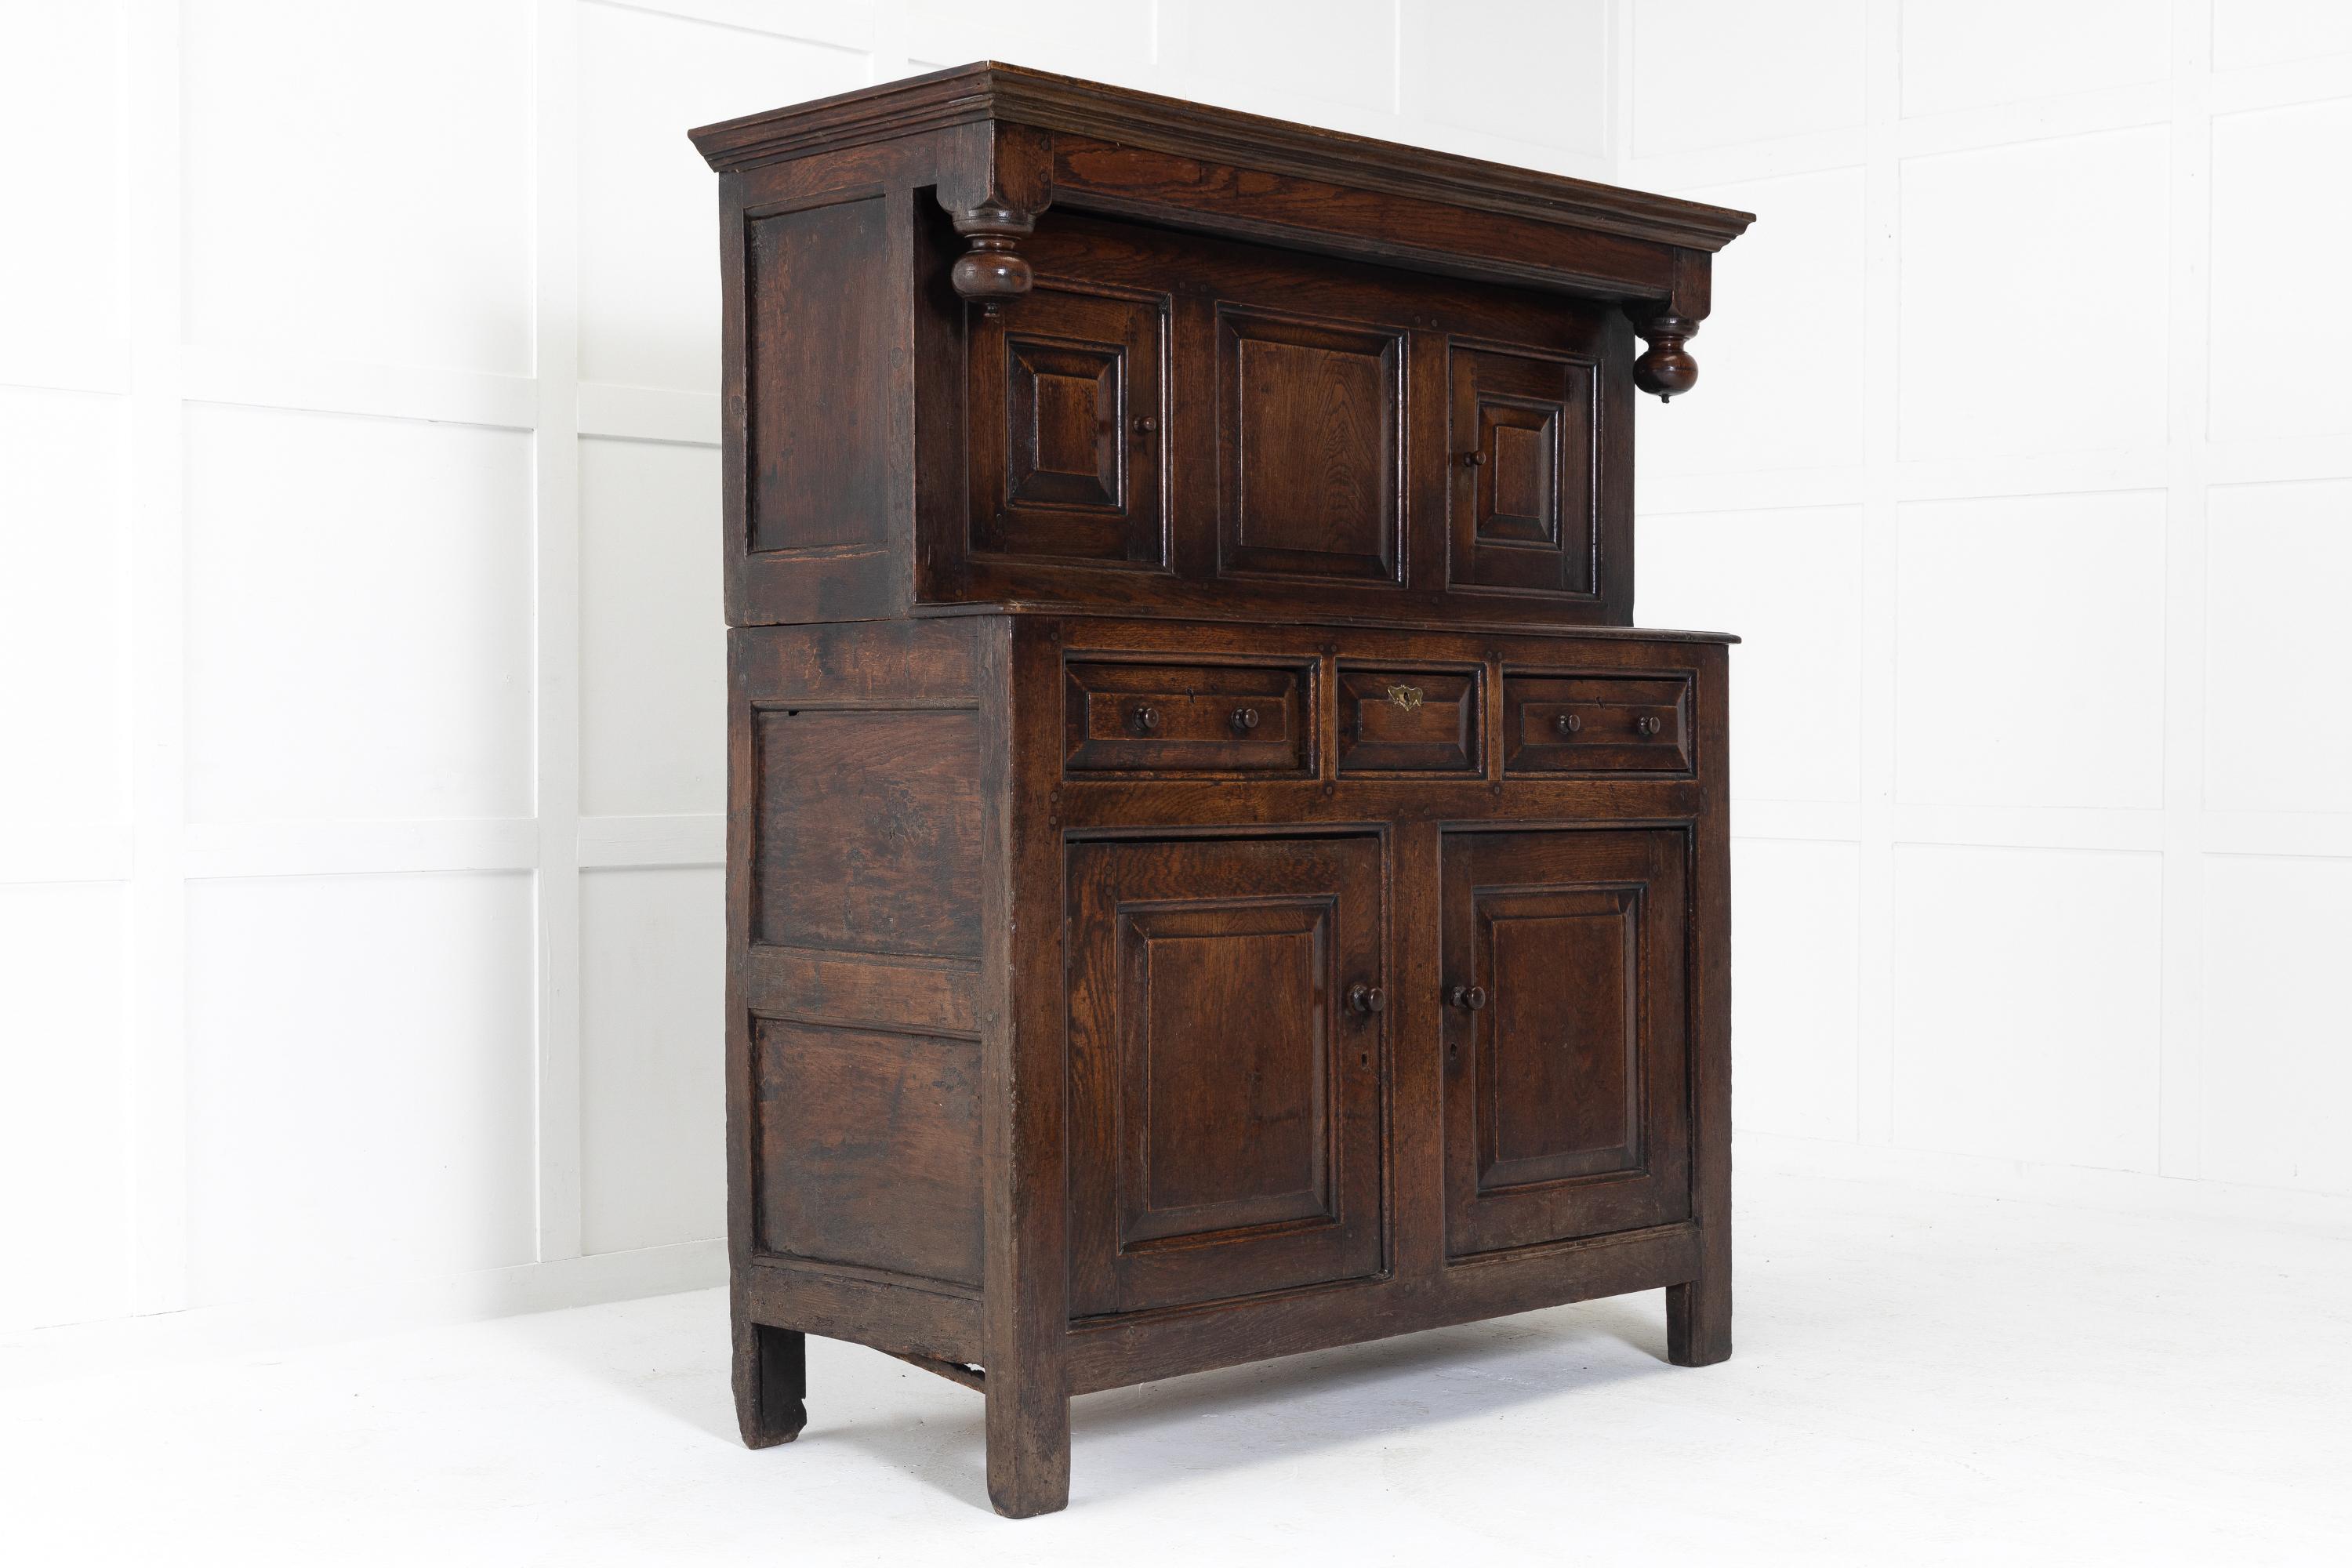 18th English century oak cupboard/dudarn or court cupboard. Having a moulded cornice top above an overhanging frieze. Turned pendant buns with small finials hang at the corners to the upper section, fitted with two panelled cupboard doors. The lower